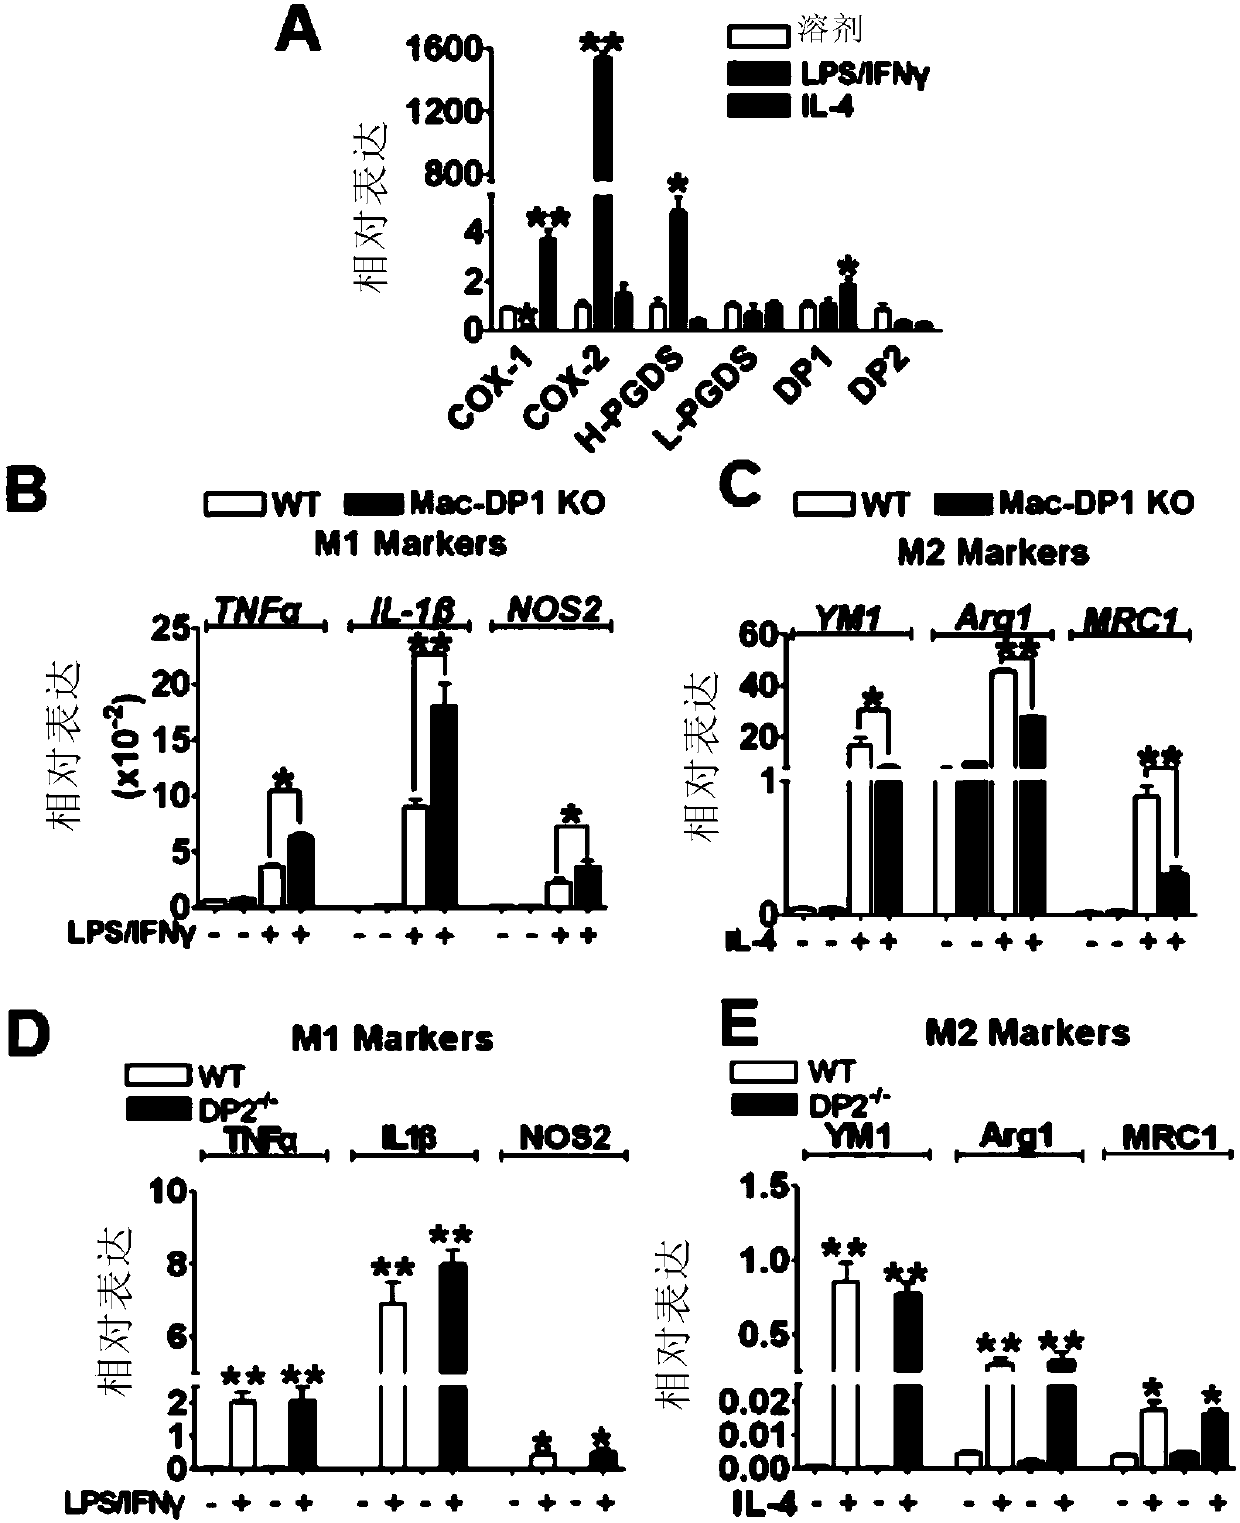 Application of PRKAR2A in inflammation diminishing